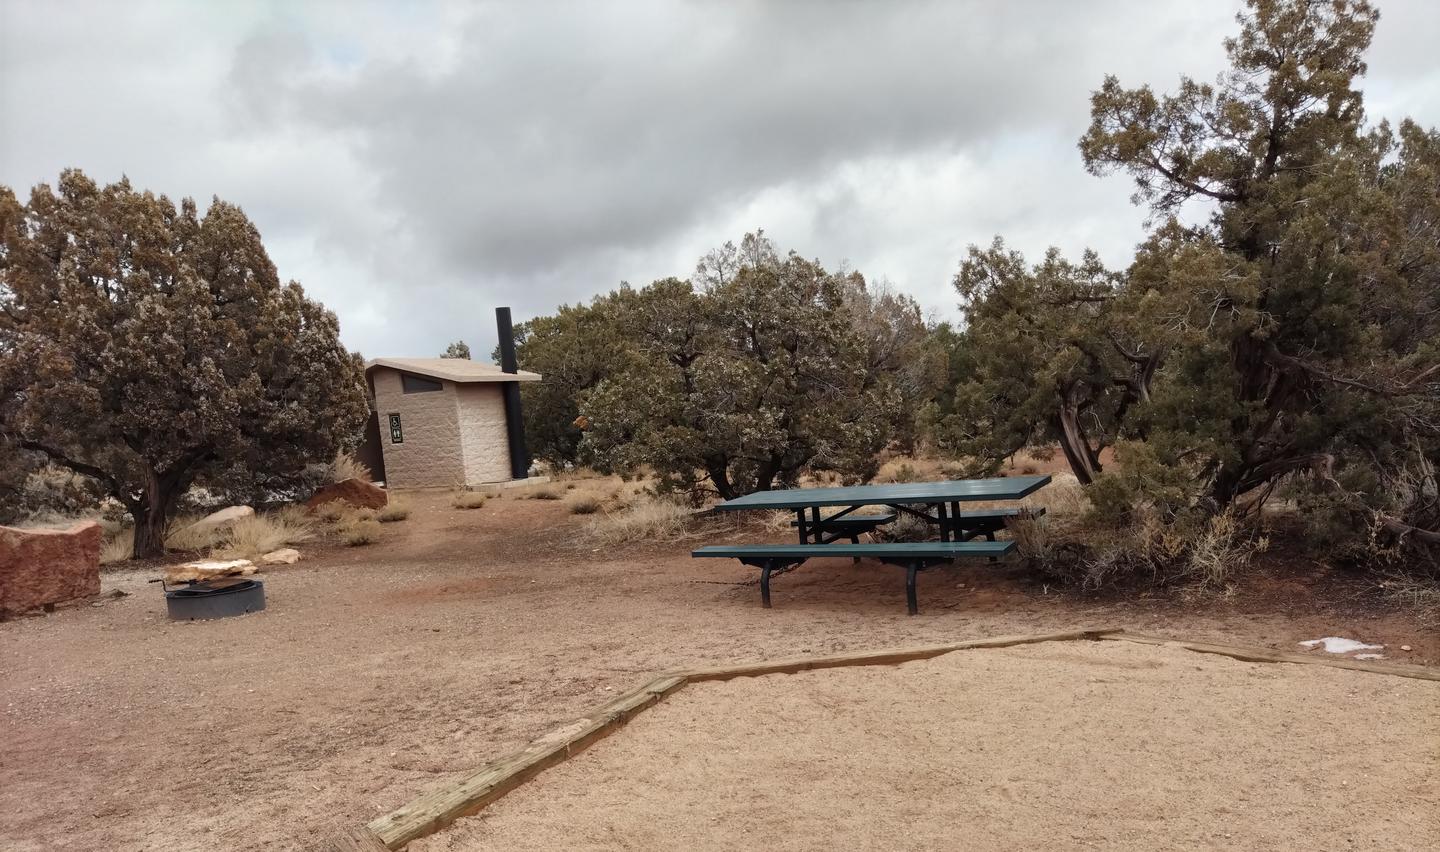 Picnic table at Site 11. Site 11 has a tent pad, a picnic table and a metal fire ring. The site is surrounded by a pinon-juniper forest.